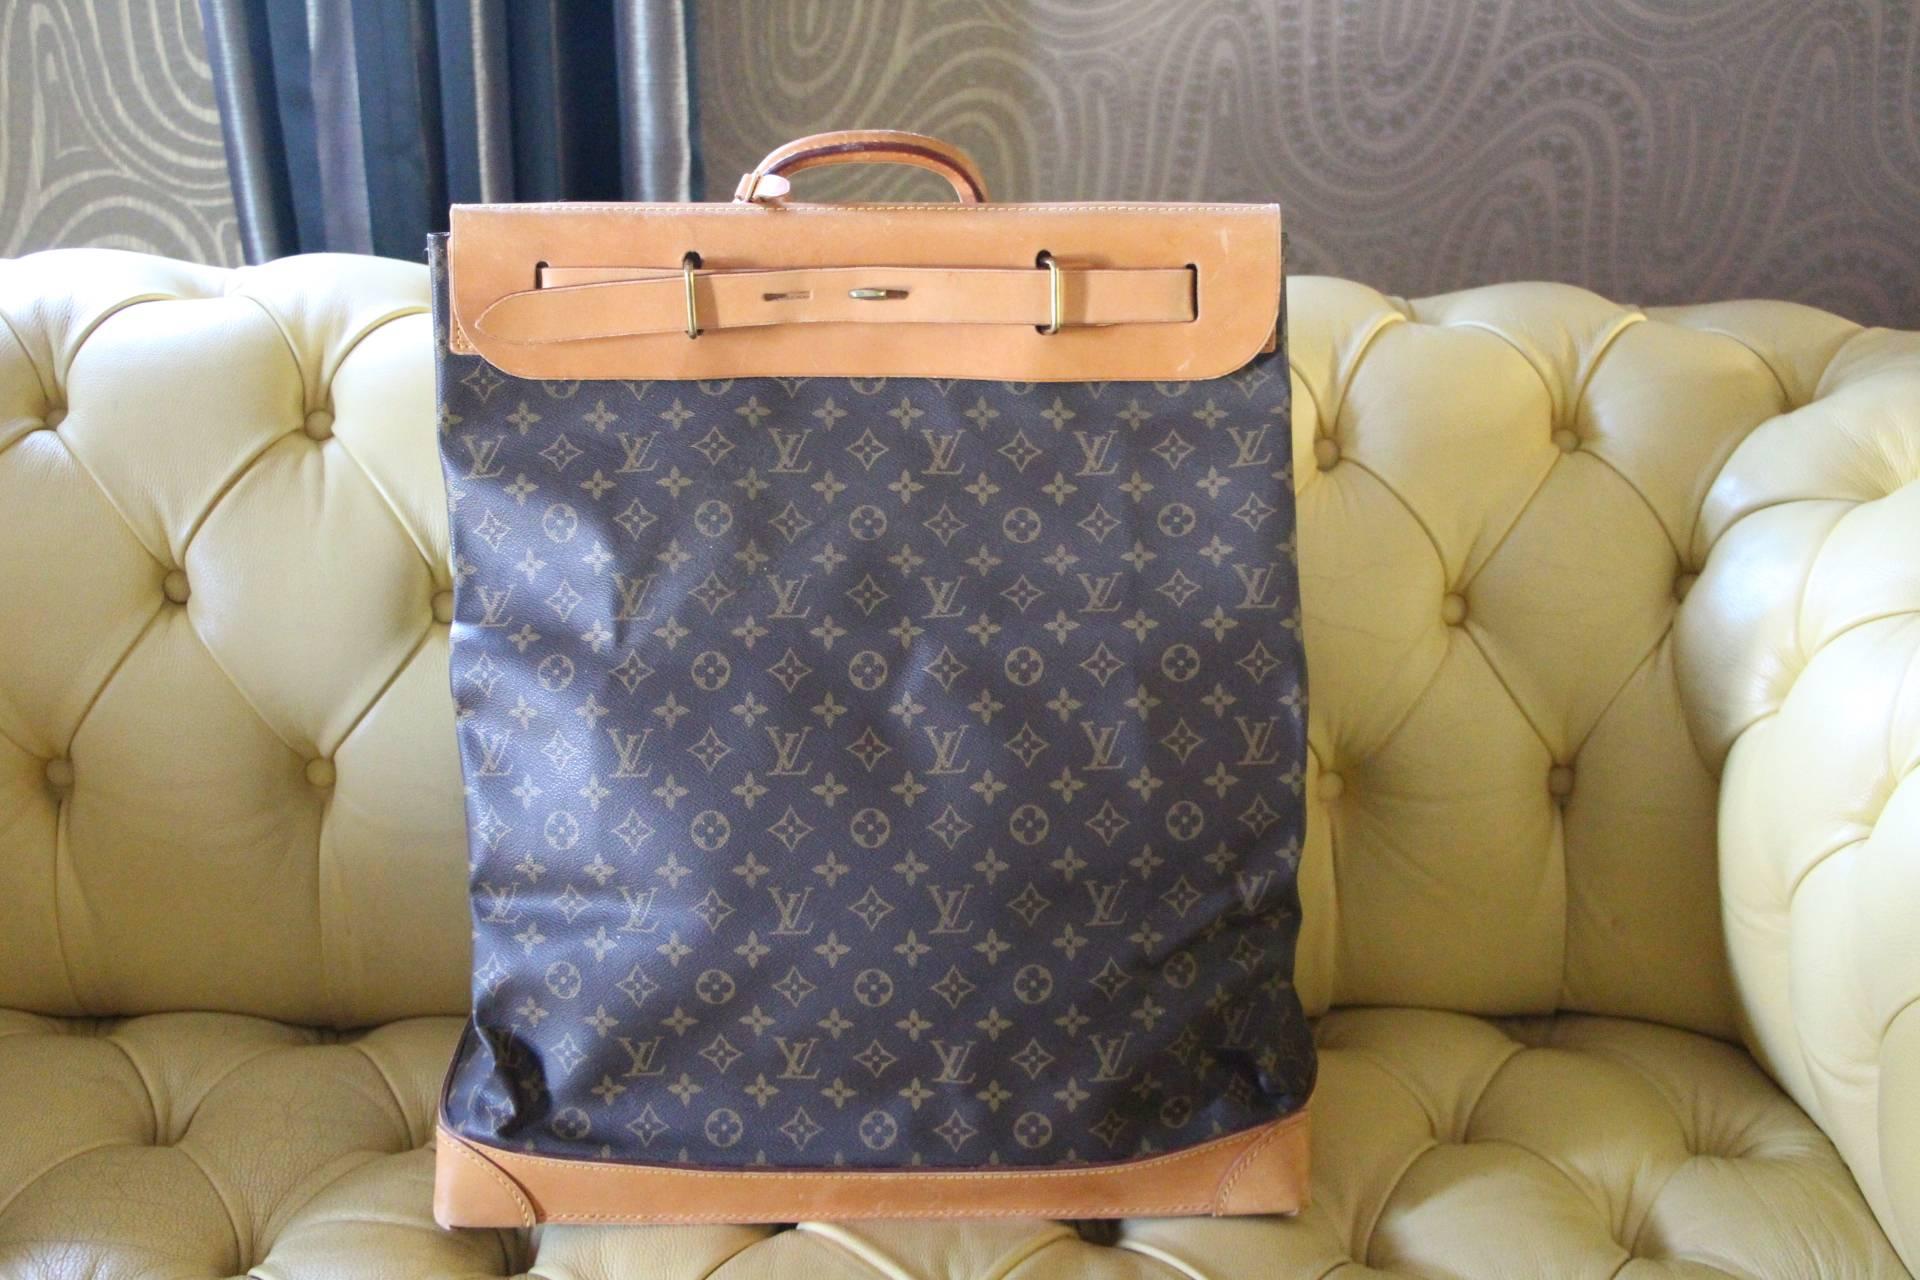 Beautiful Louis Vuitton monogram canvas.
Leather has got a very nice patina. Original LV name holder. Original Louis Vuitton padlock with its key
Its interior is in very good condition, no stain and no smell.
As this bag is not sold any longer in